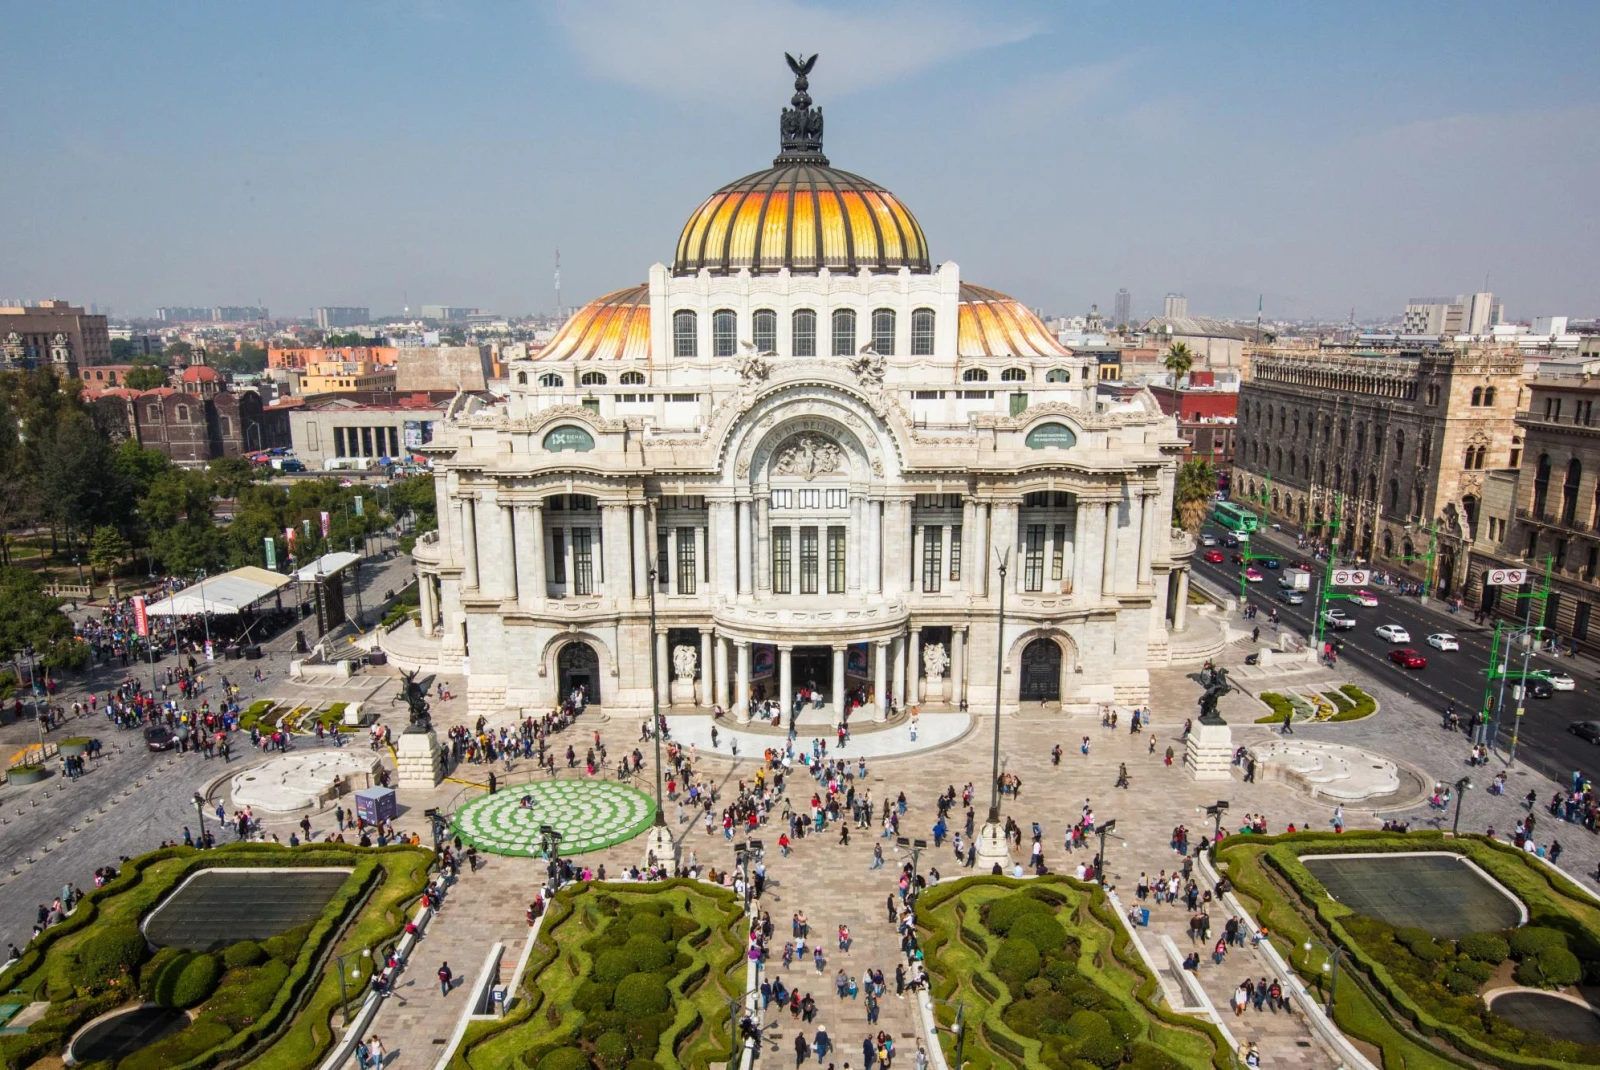 aerial view of a grand historic building with a gold dome